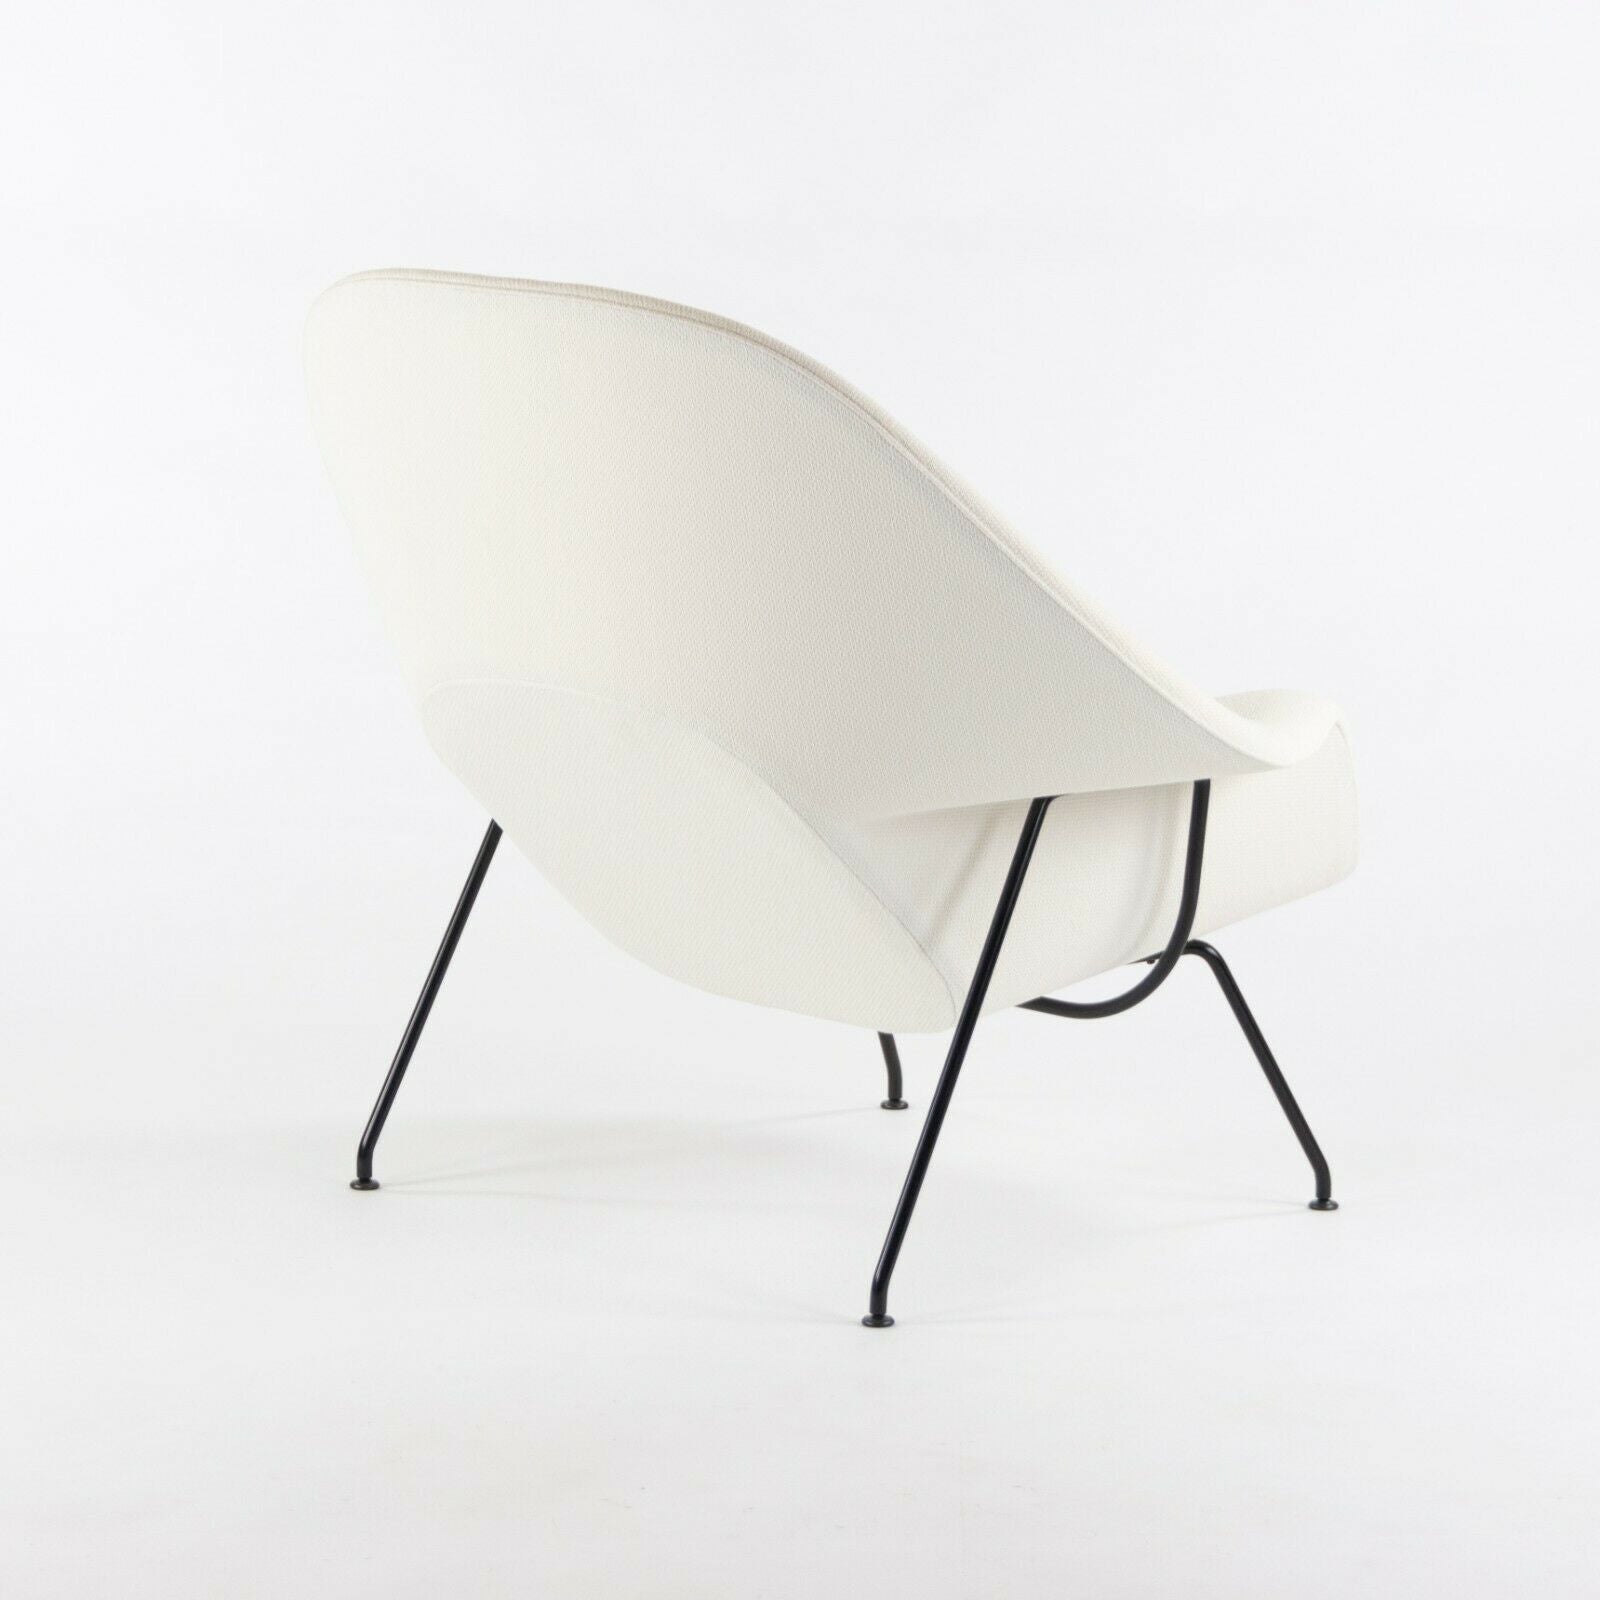 SOLD 2020 Eero Saarinen for Knoll Studio Womb Chair in White / Ivory Boucle Fabric